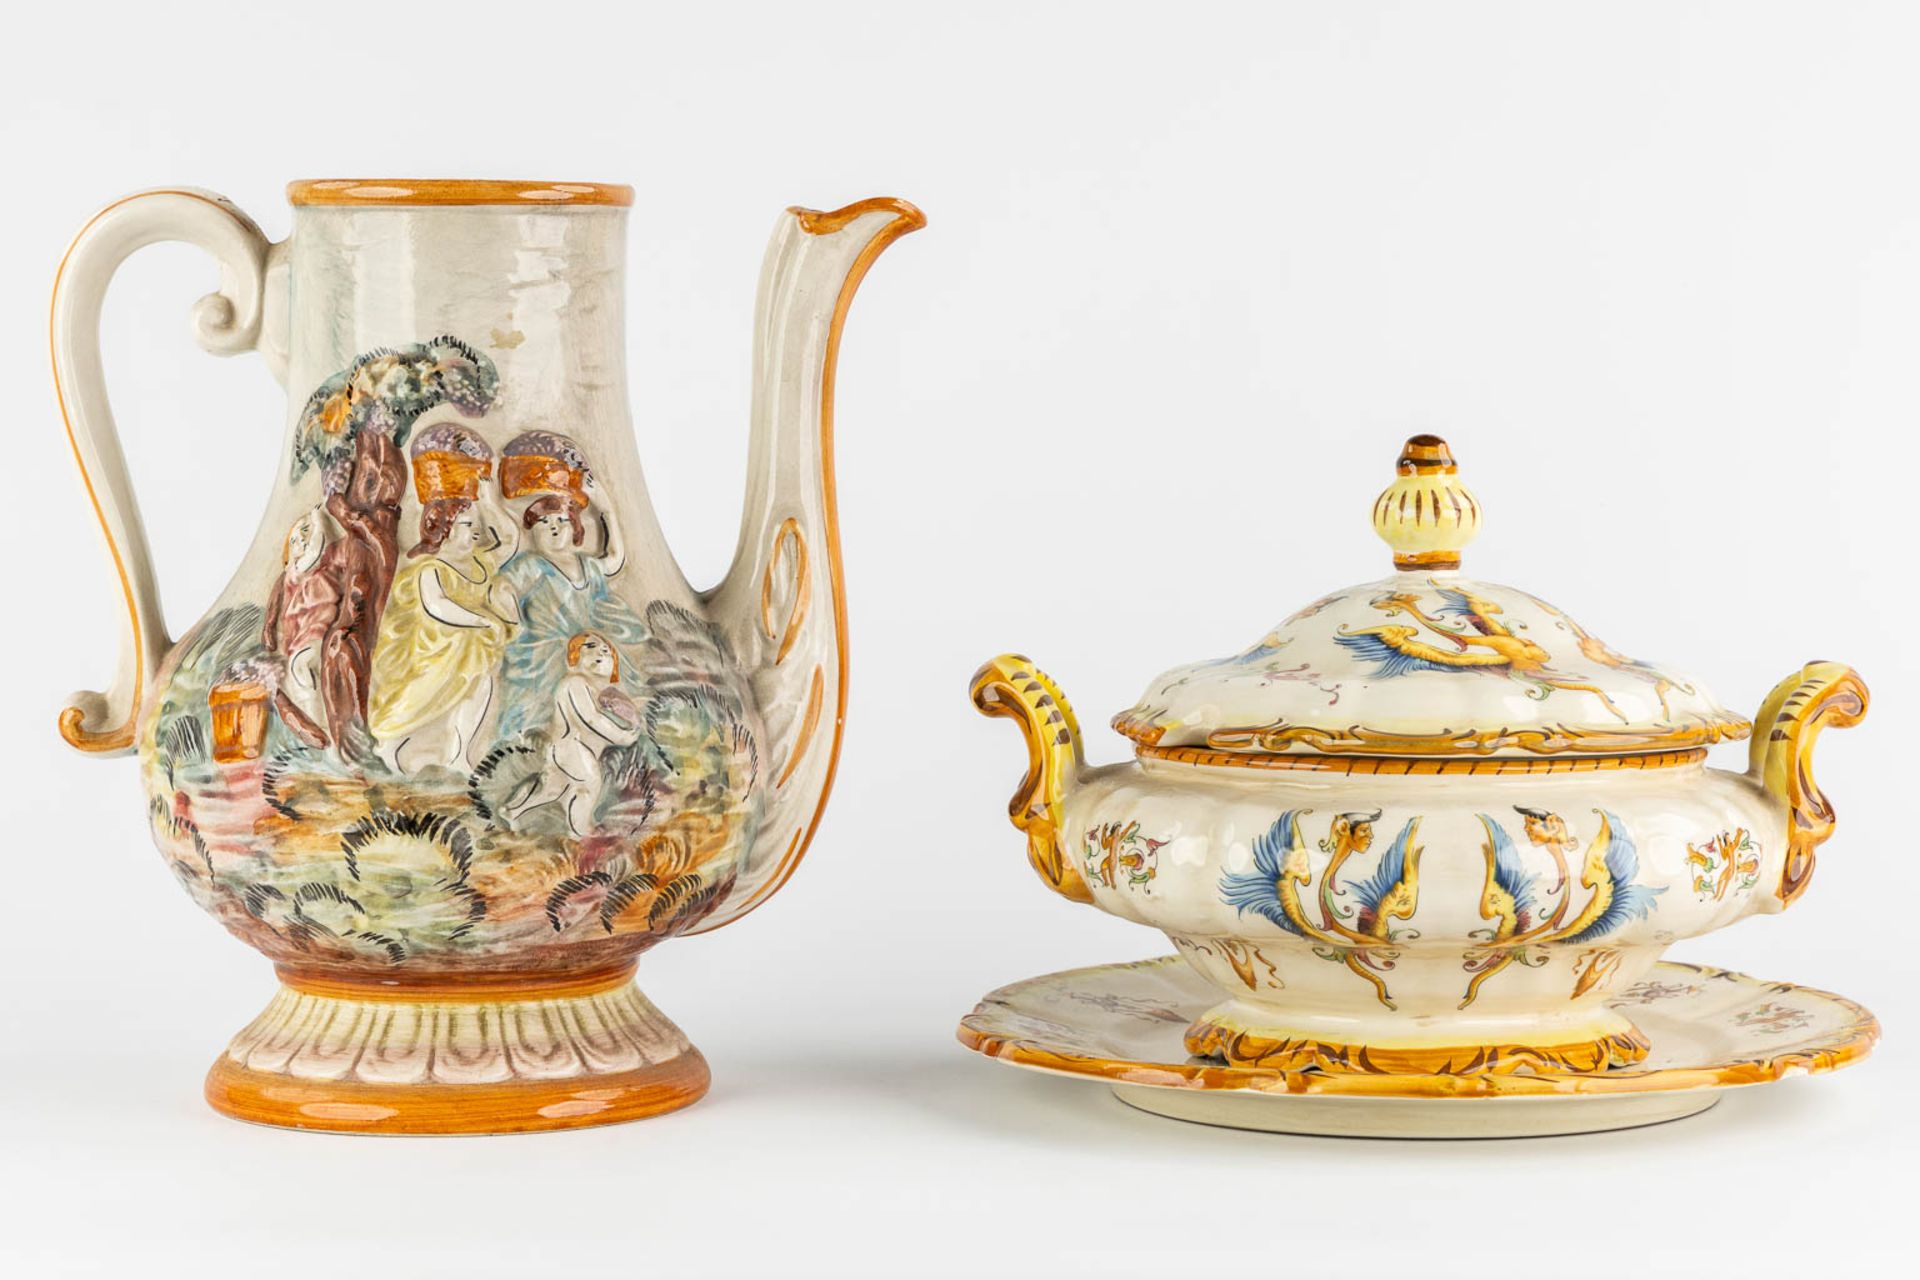 Capodimonte, 5 large pitchers, vases and urns. Glazed faience. (L:23 x W:31 x H:50 cm) - Image 15 of 31